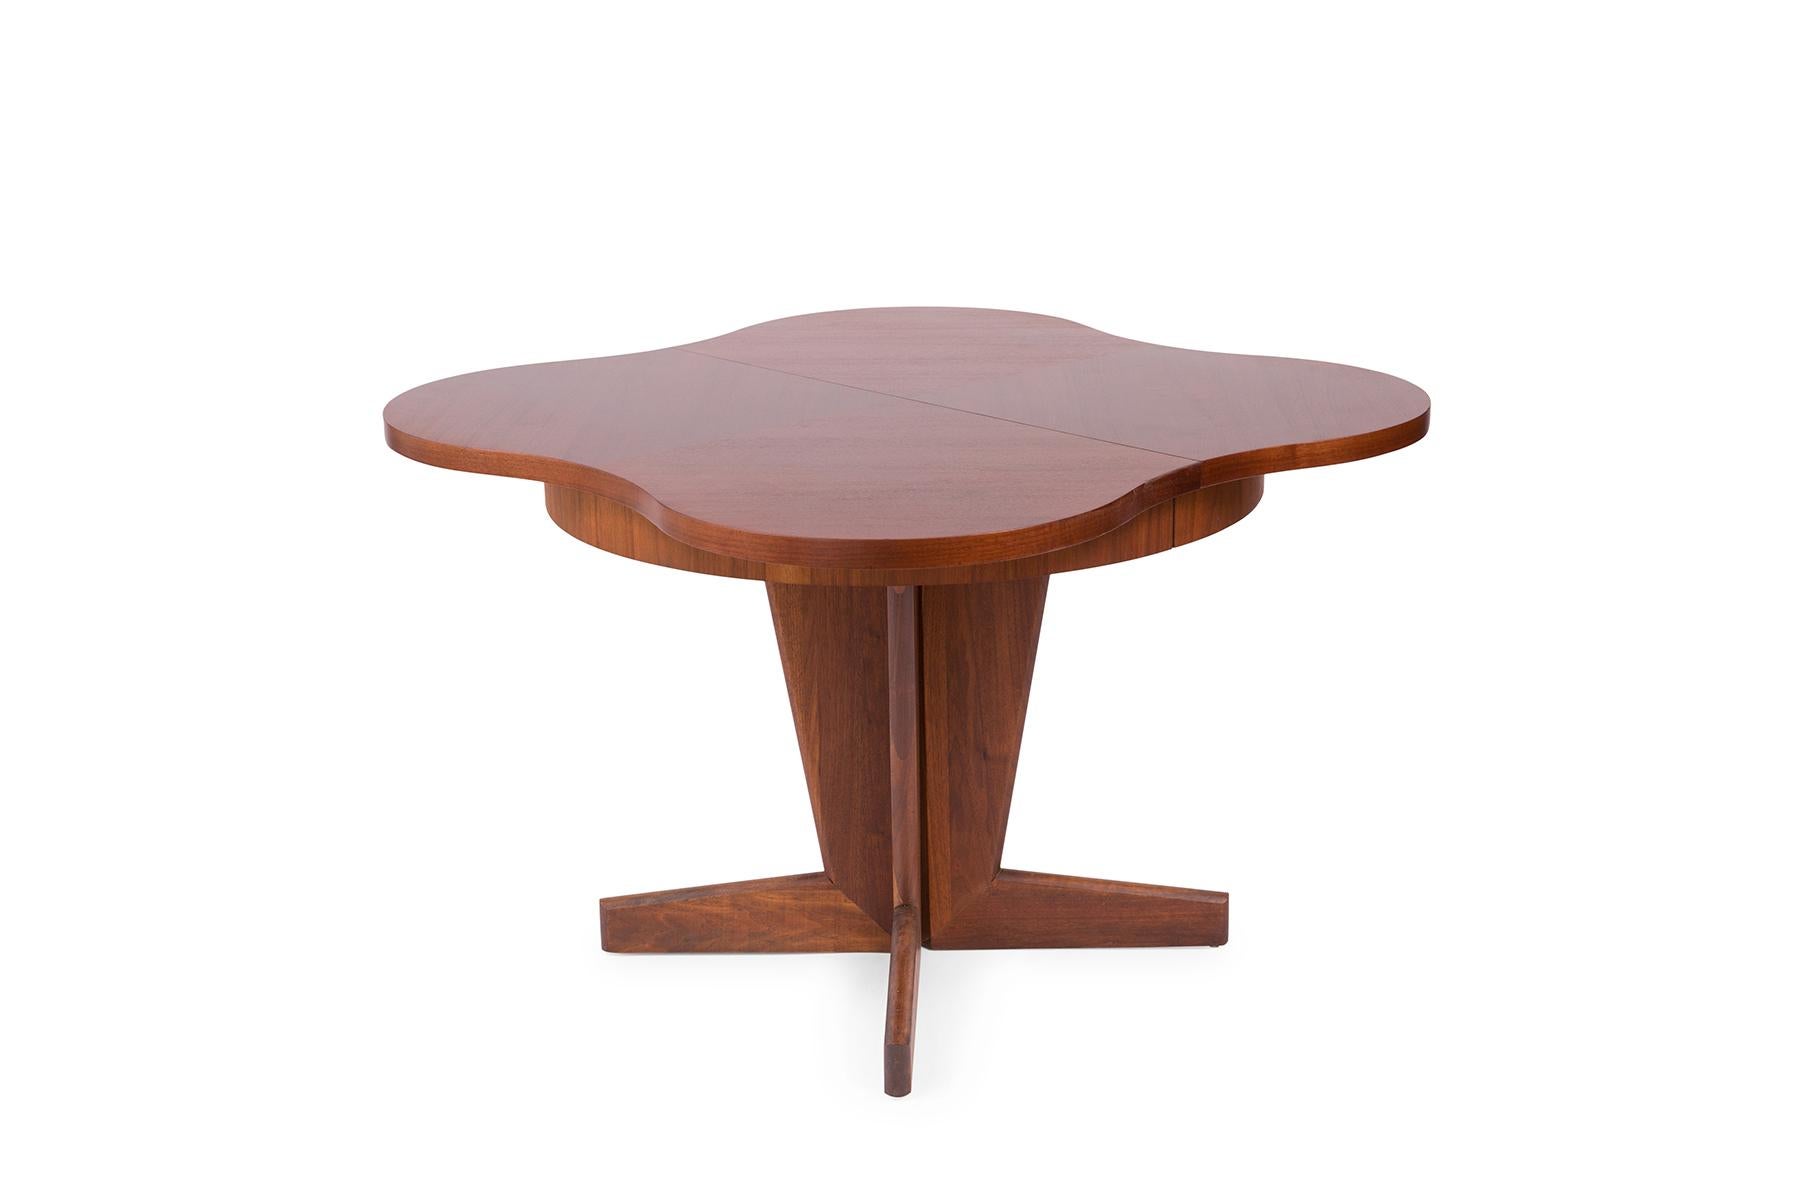 American Henry Glass Walnut Extendable Dining Table